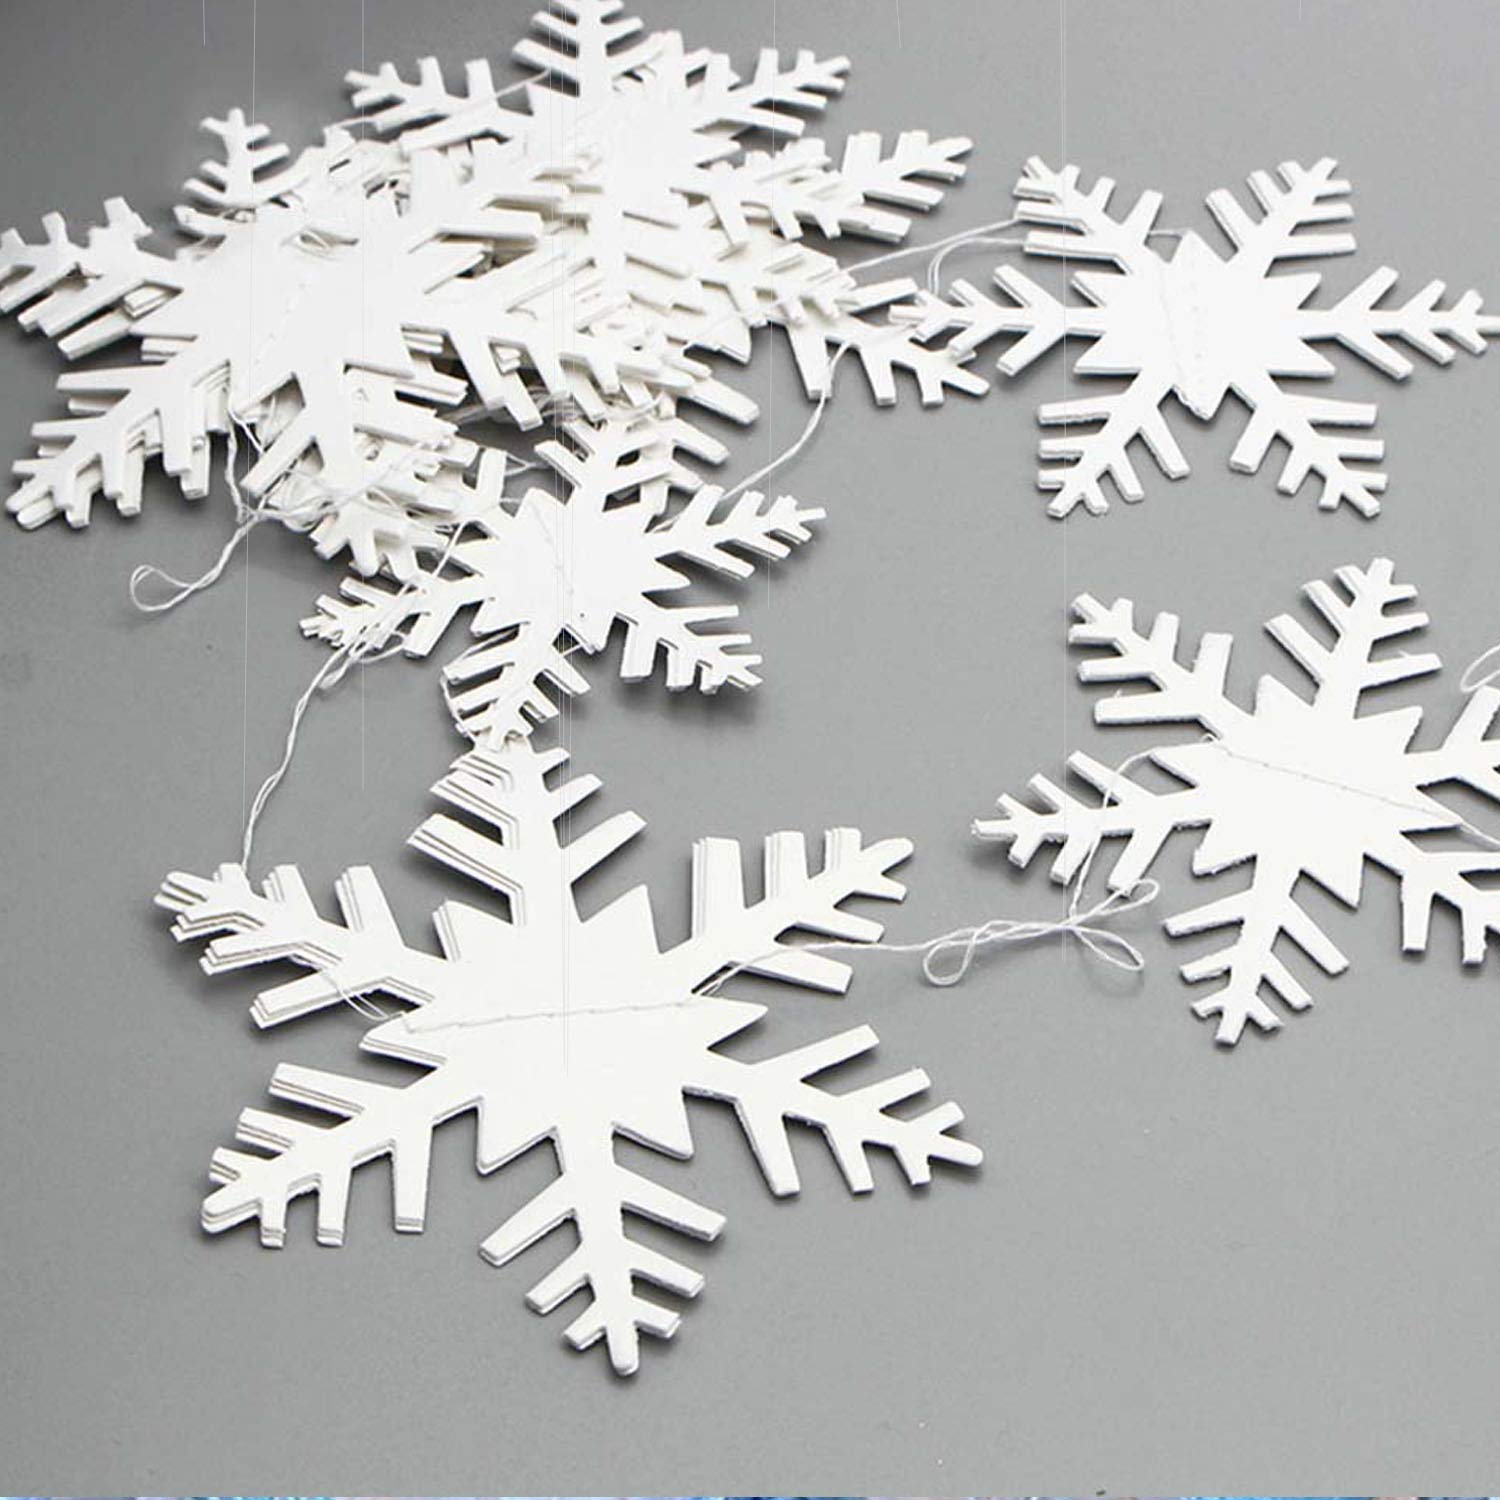 Winter Christmas Hanging Snowflake Decorations, 12PCS 3D Large Silver Snowflakes & 12PCS White Paper Snowflakes Hanging Garland for Christmas Winter Wonderland Holiday New Year Party Home Decoration